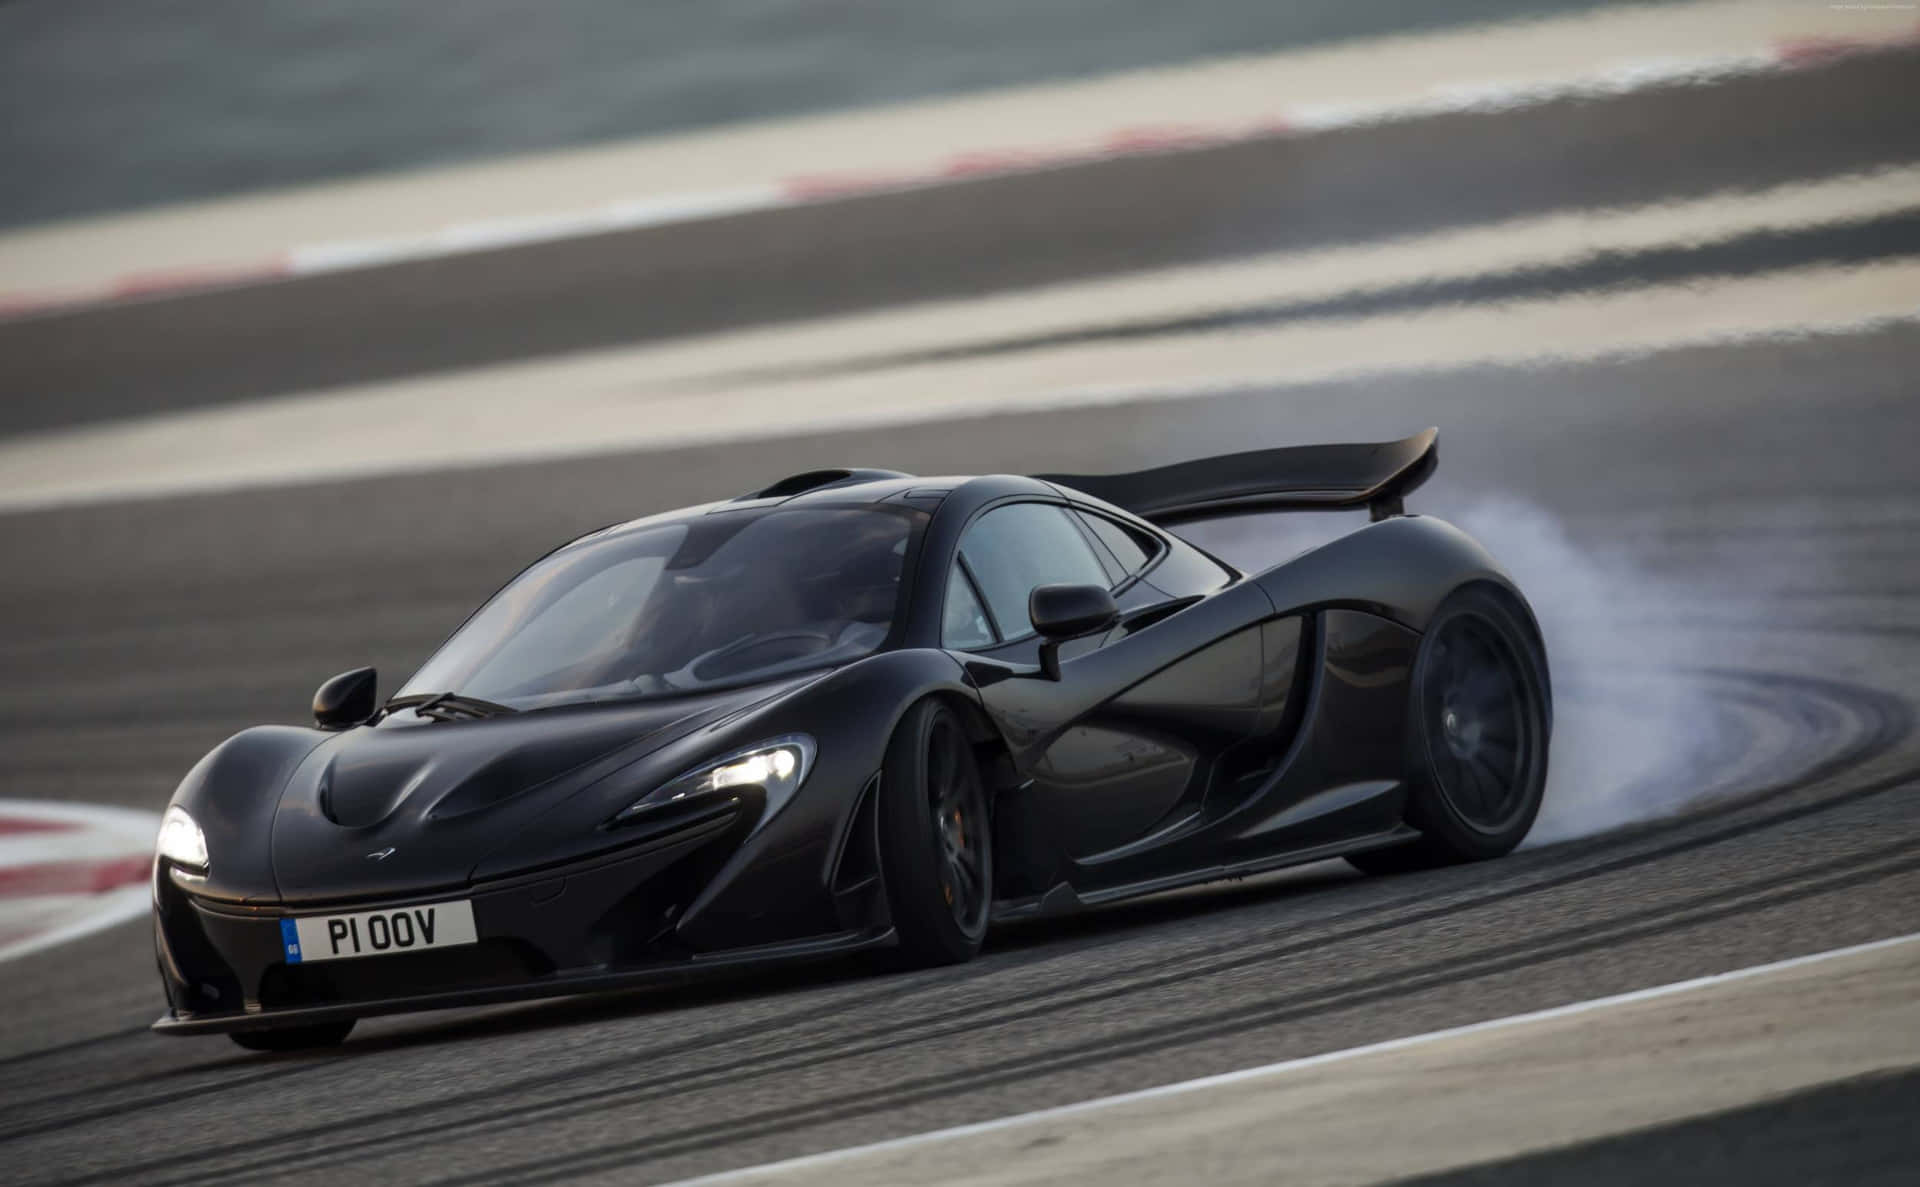 A High Definition Image Of The Sleek Mclaren P1 Supercar, Showcasing Speed And Design Excellence. Wallpaper